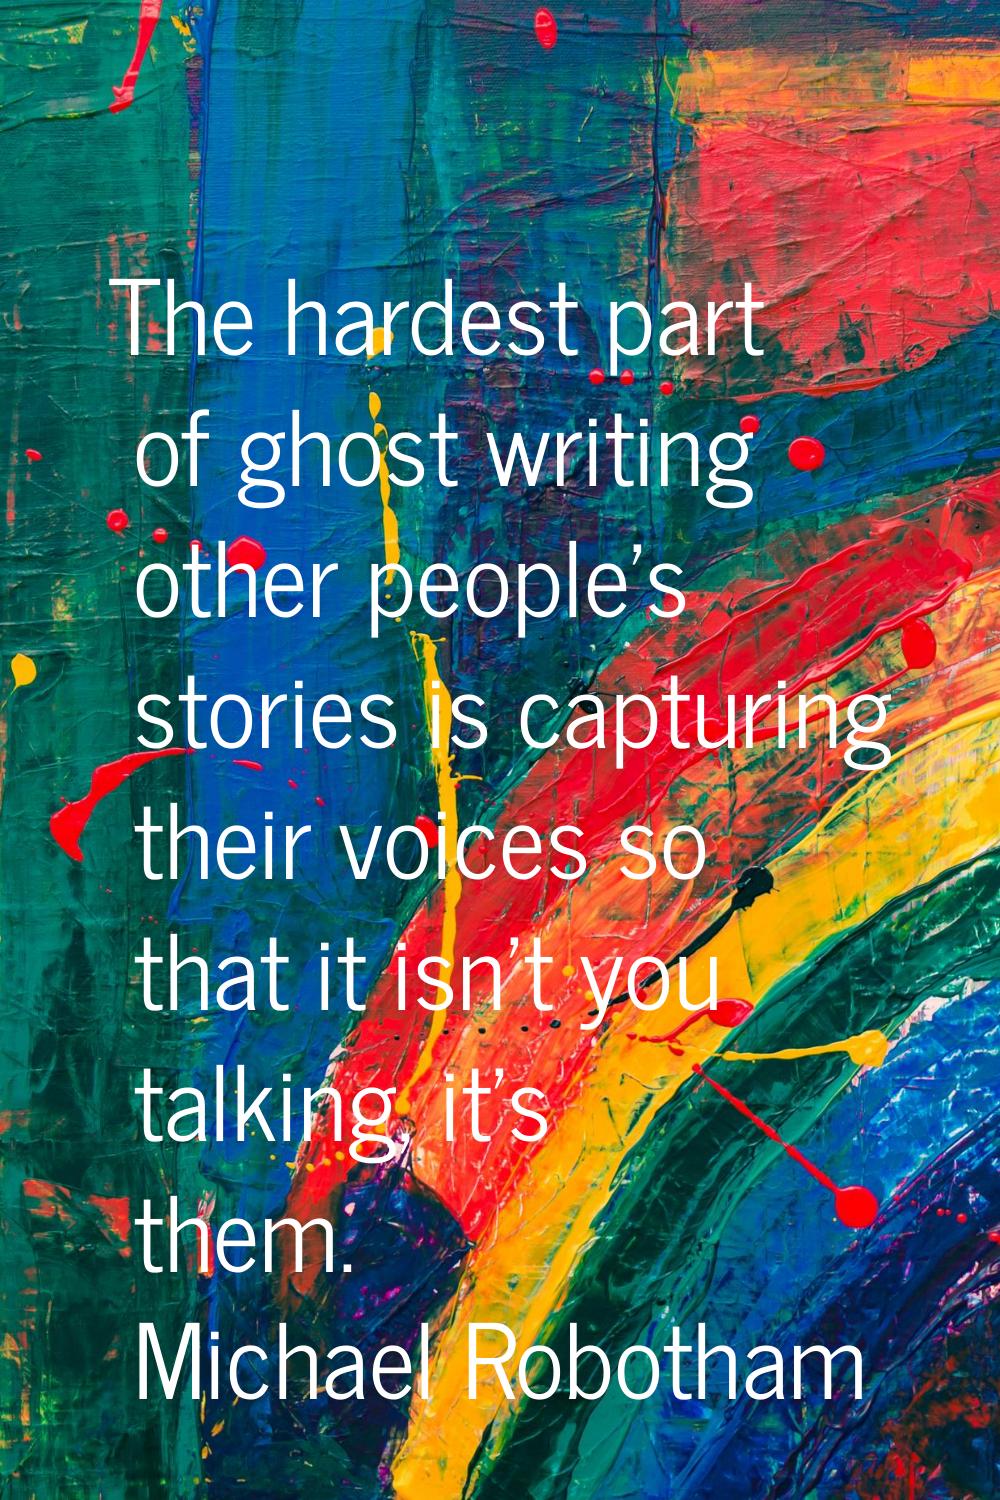 The hardest part of ghost writing other people's stories is capturing their voices so that it isn't